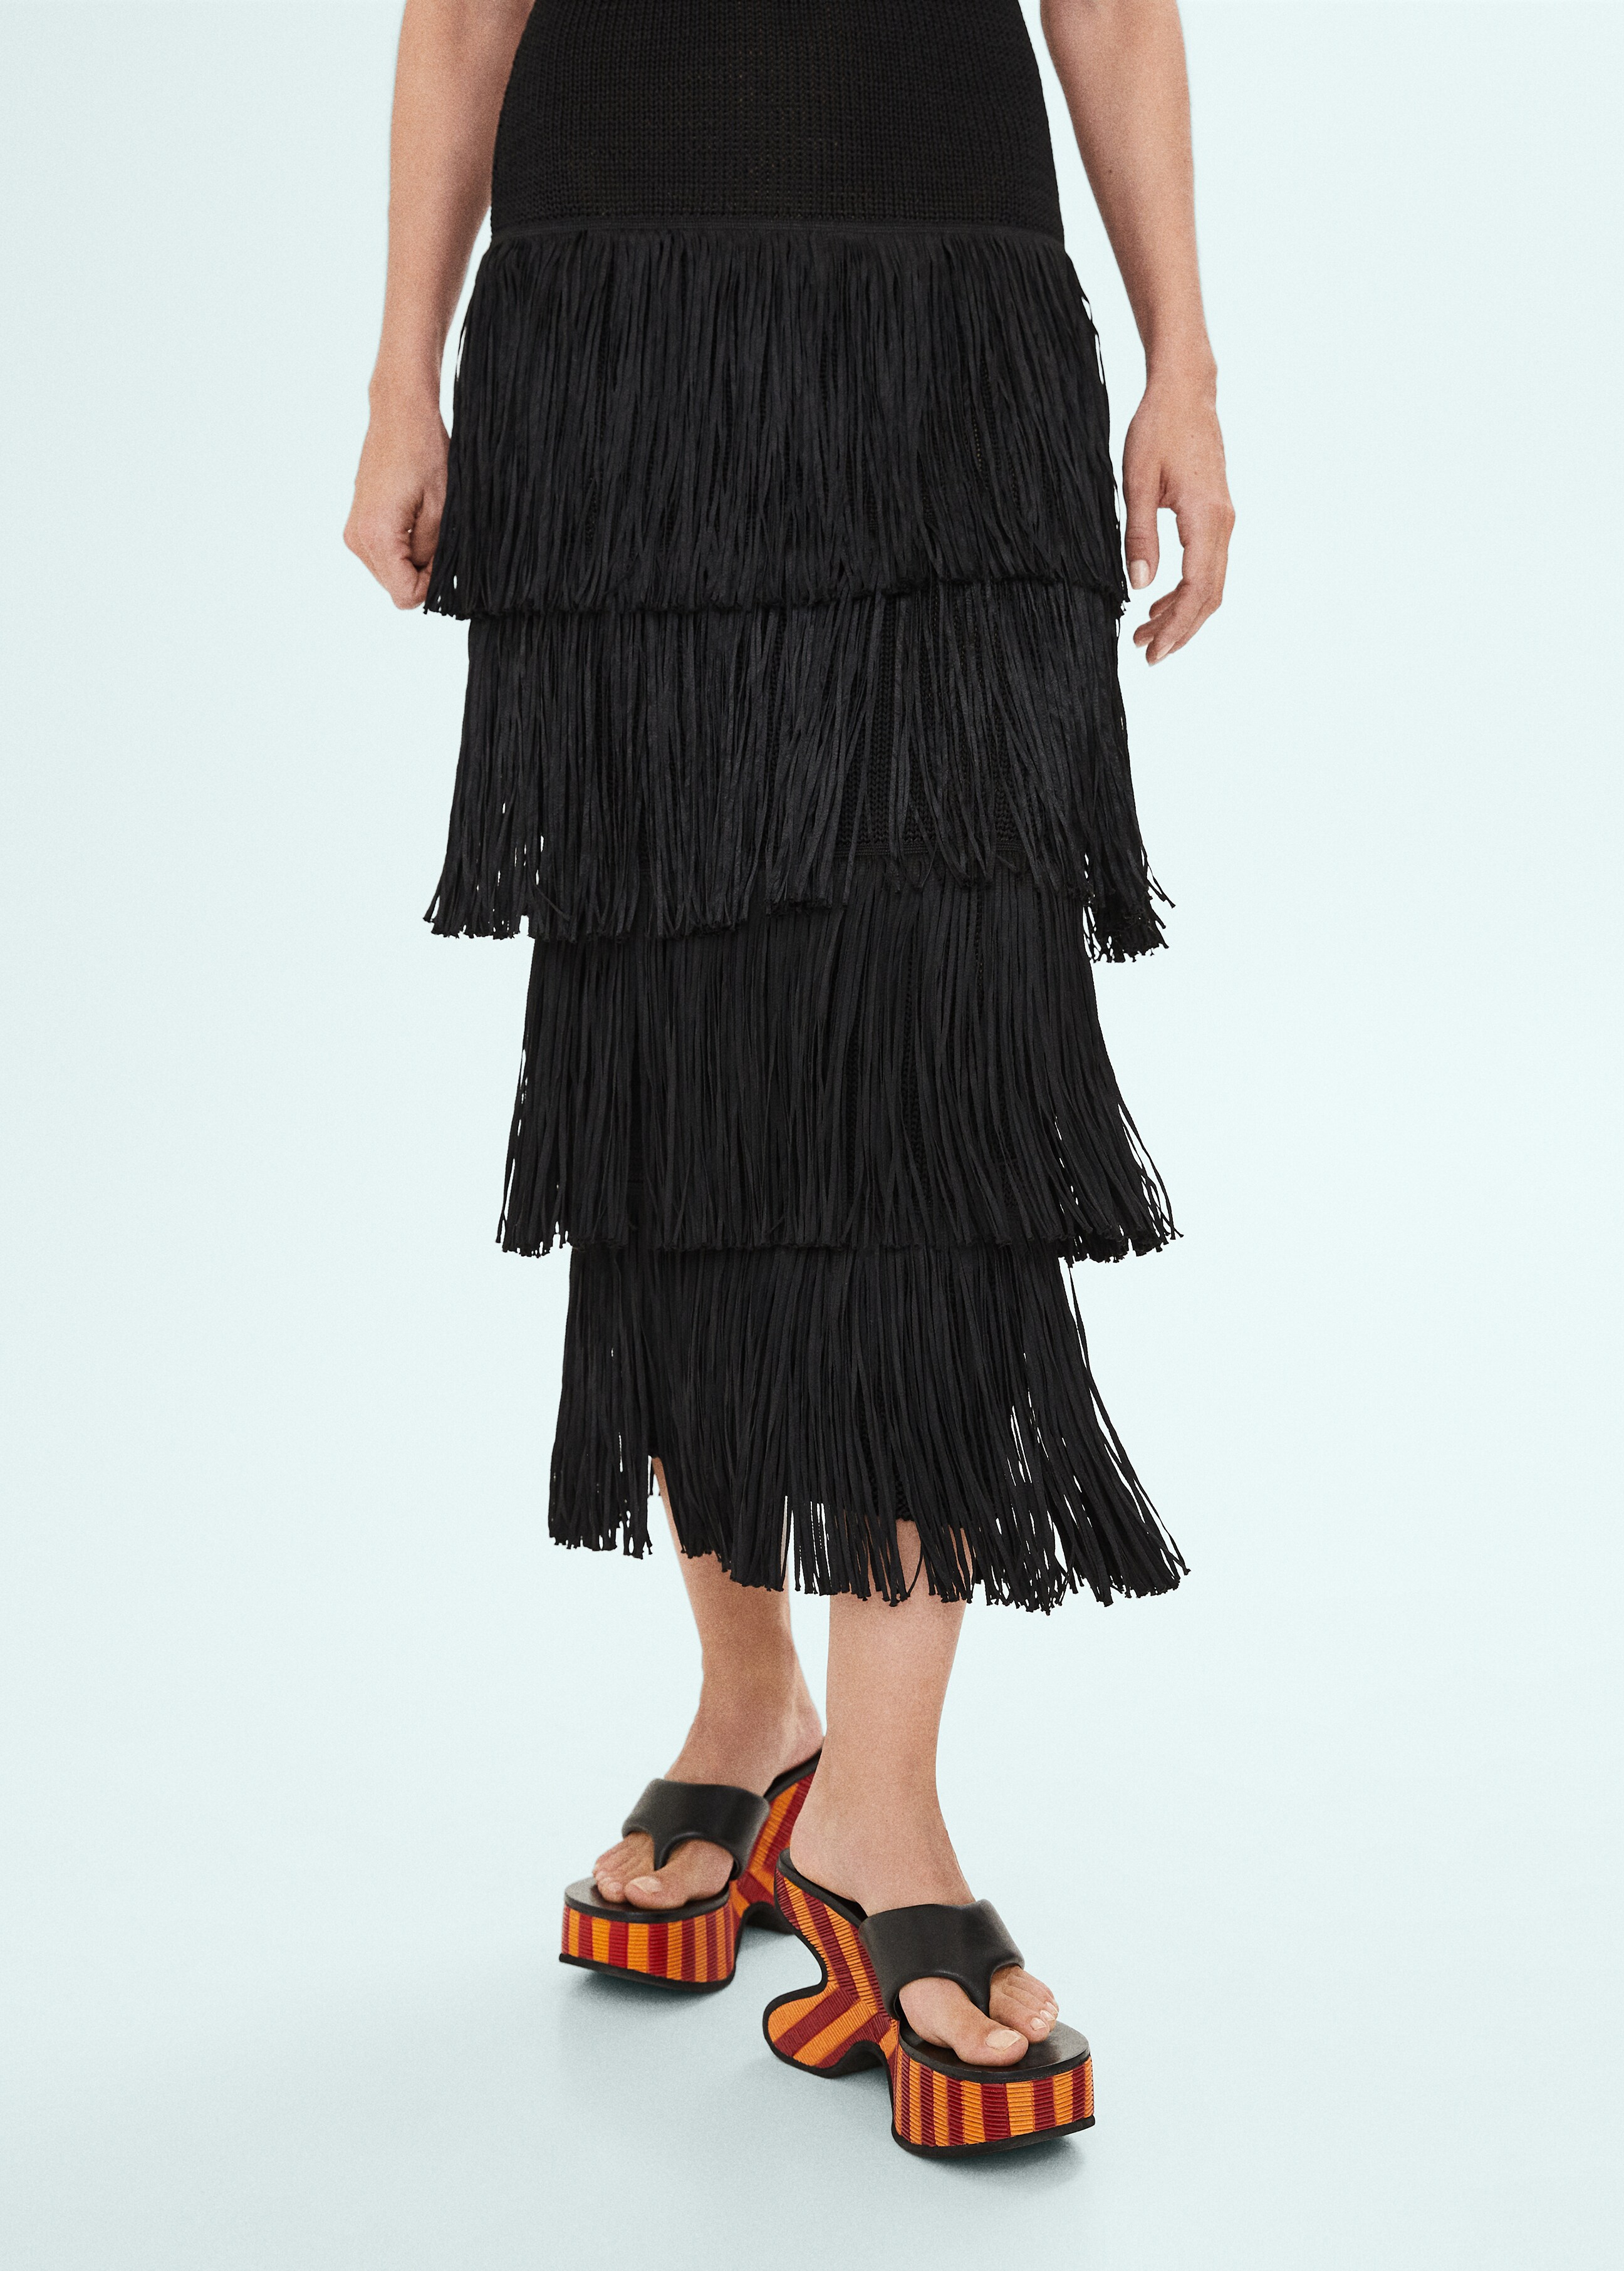 Knitted dress with fringe design - Details of the article 2